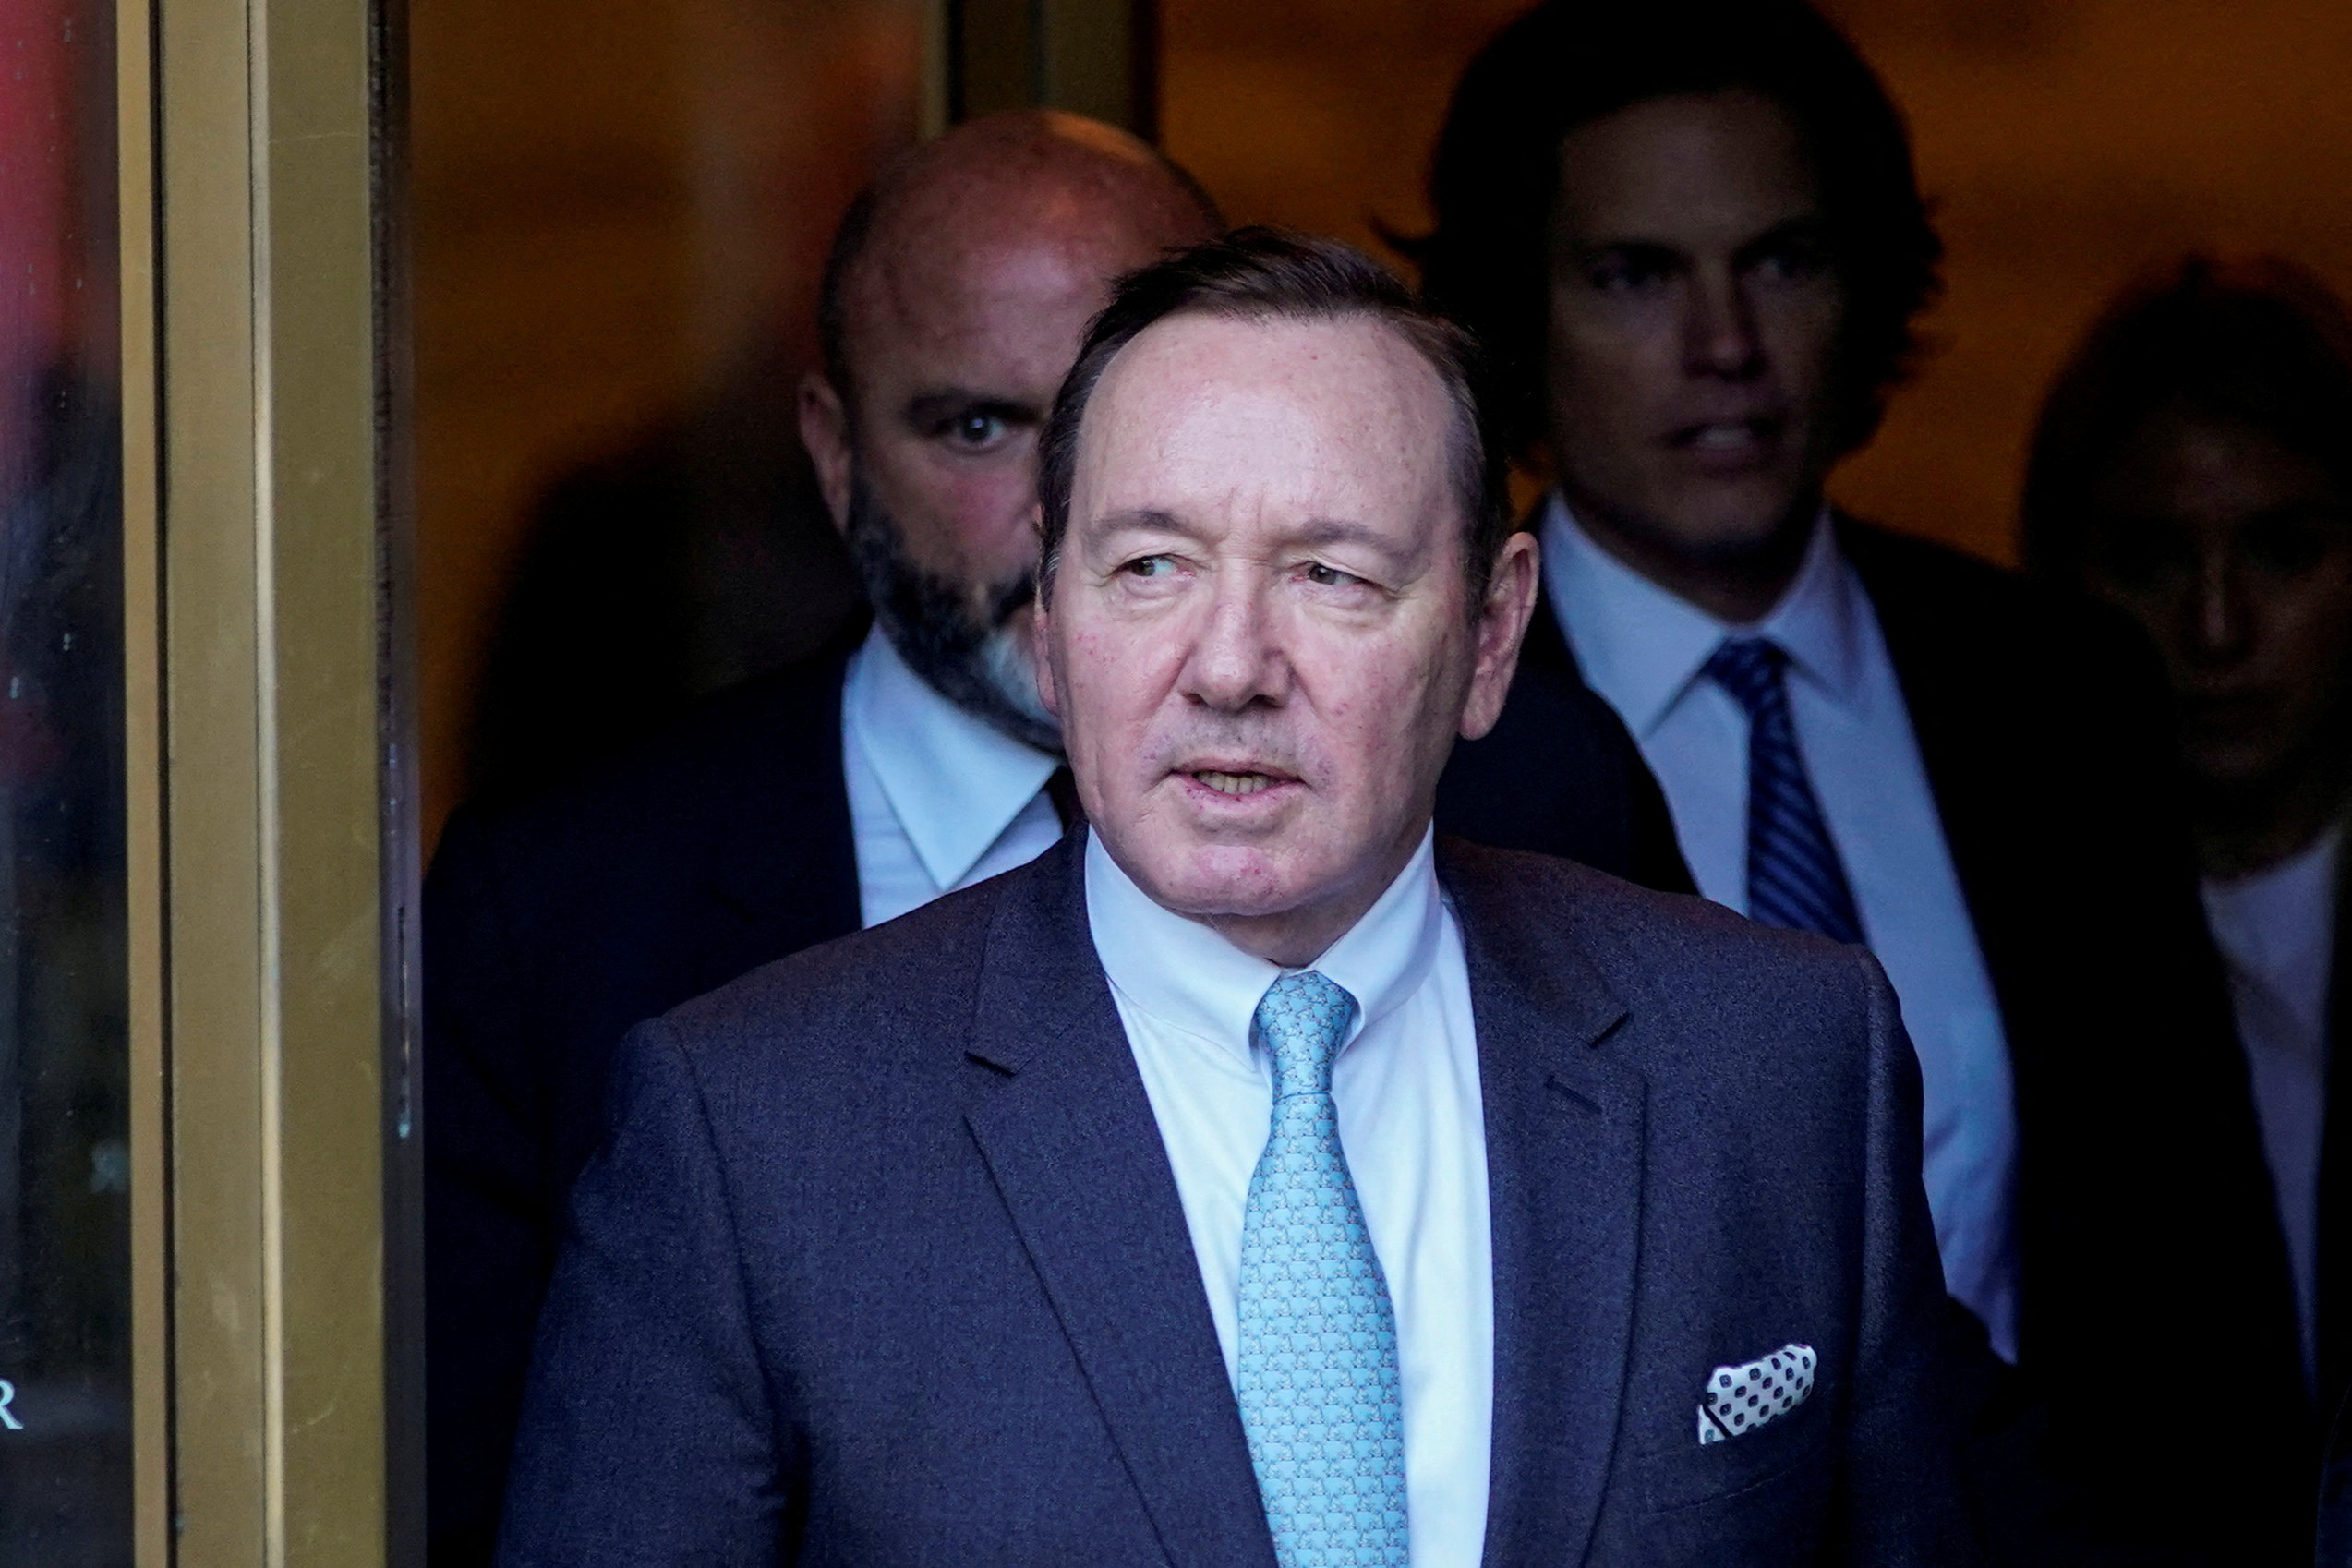 Actor Kevin Spacey exits the Manhattan Federal Court during his sex abuse trial in New York, U.S., October 6, 2022. REUTERS/Eduardo Munoz